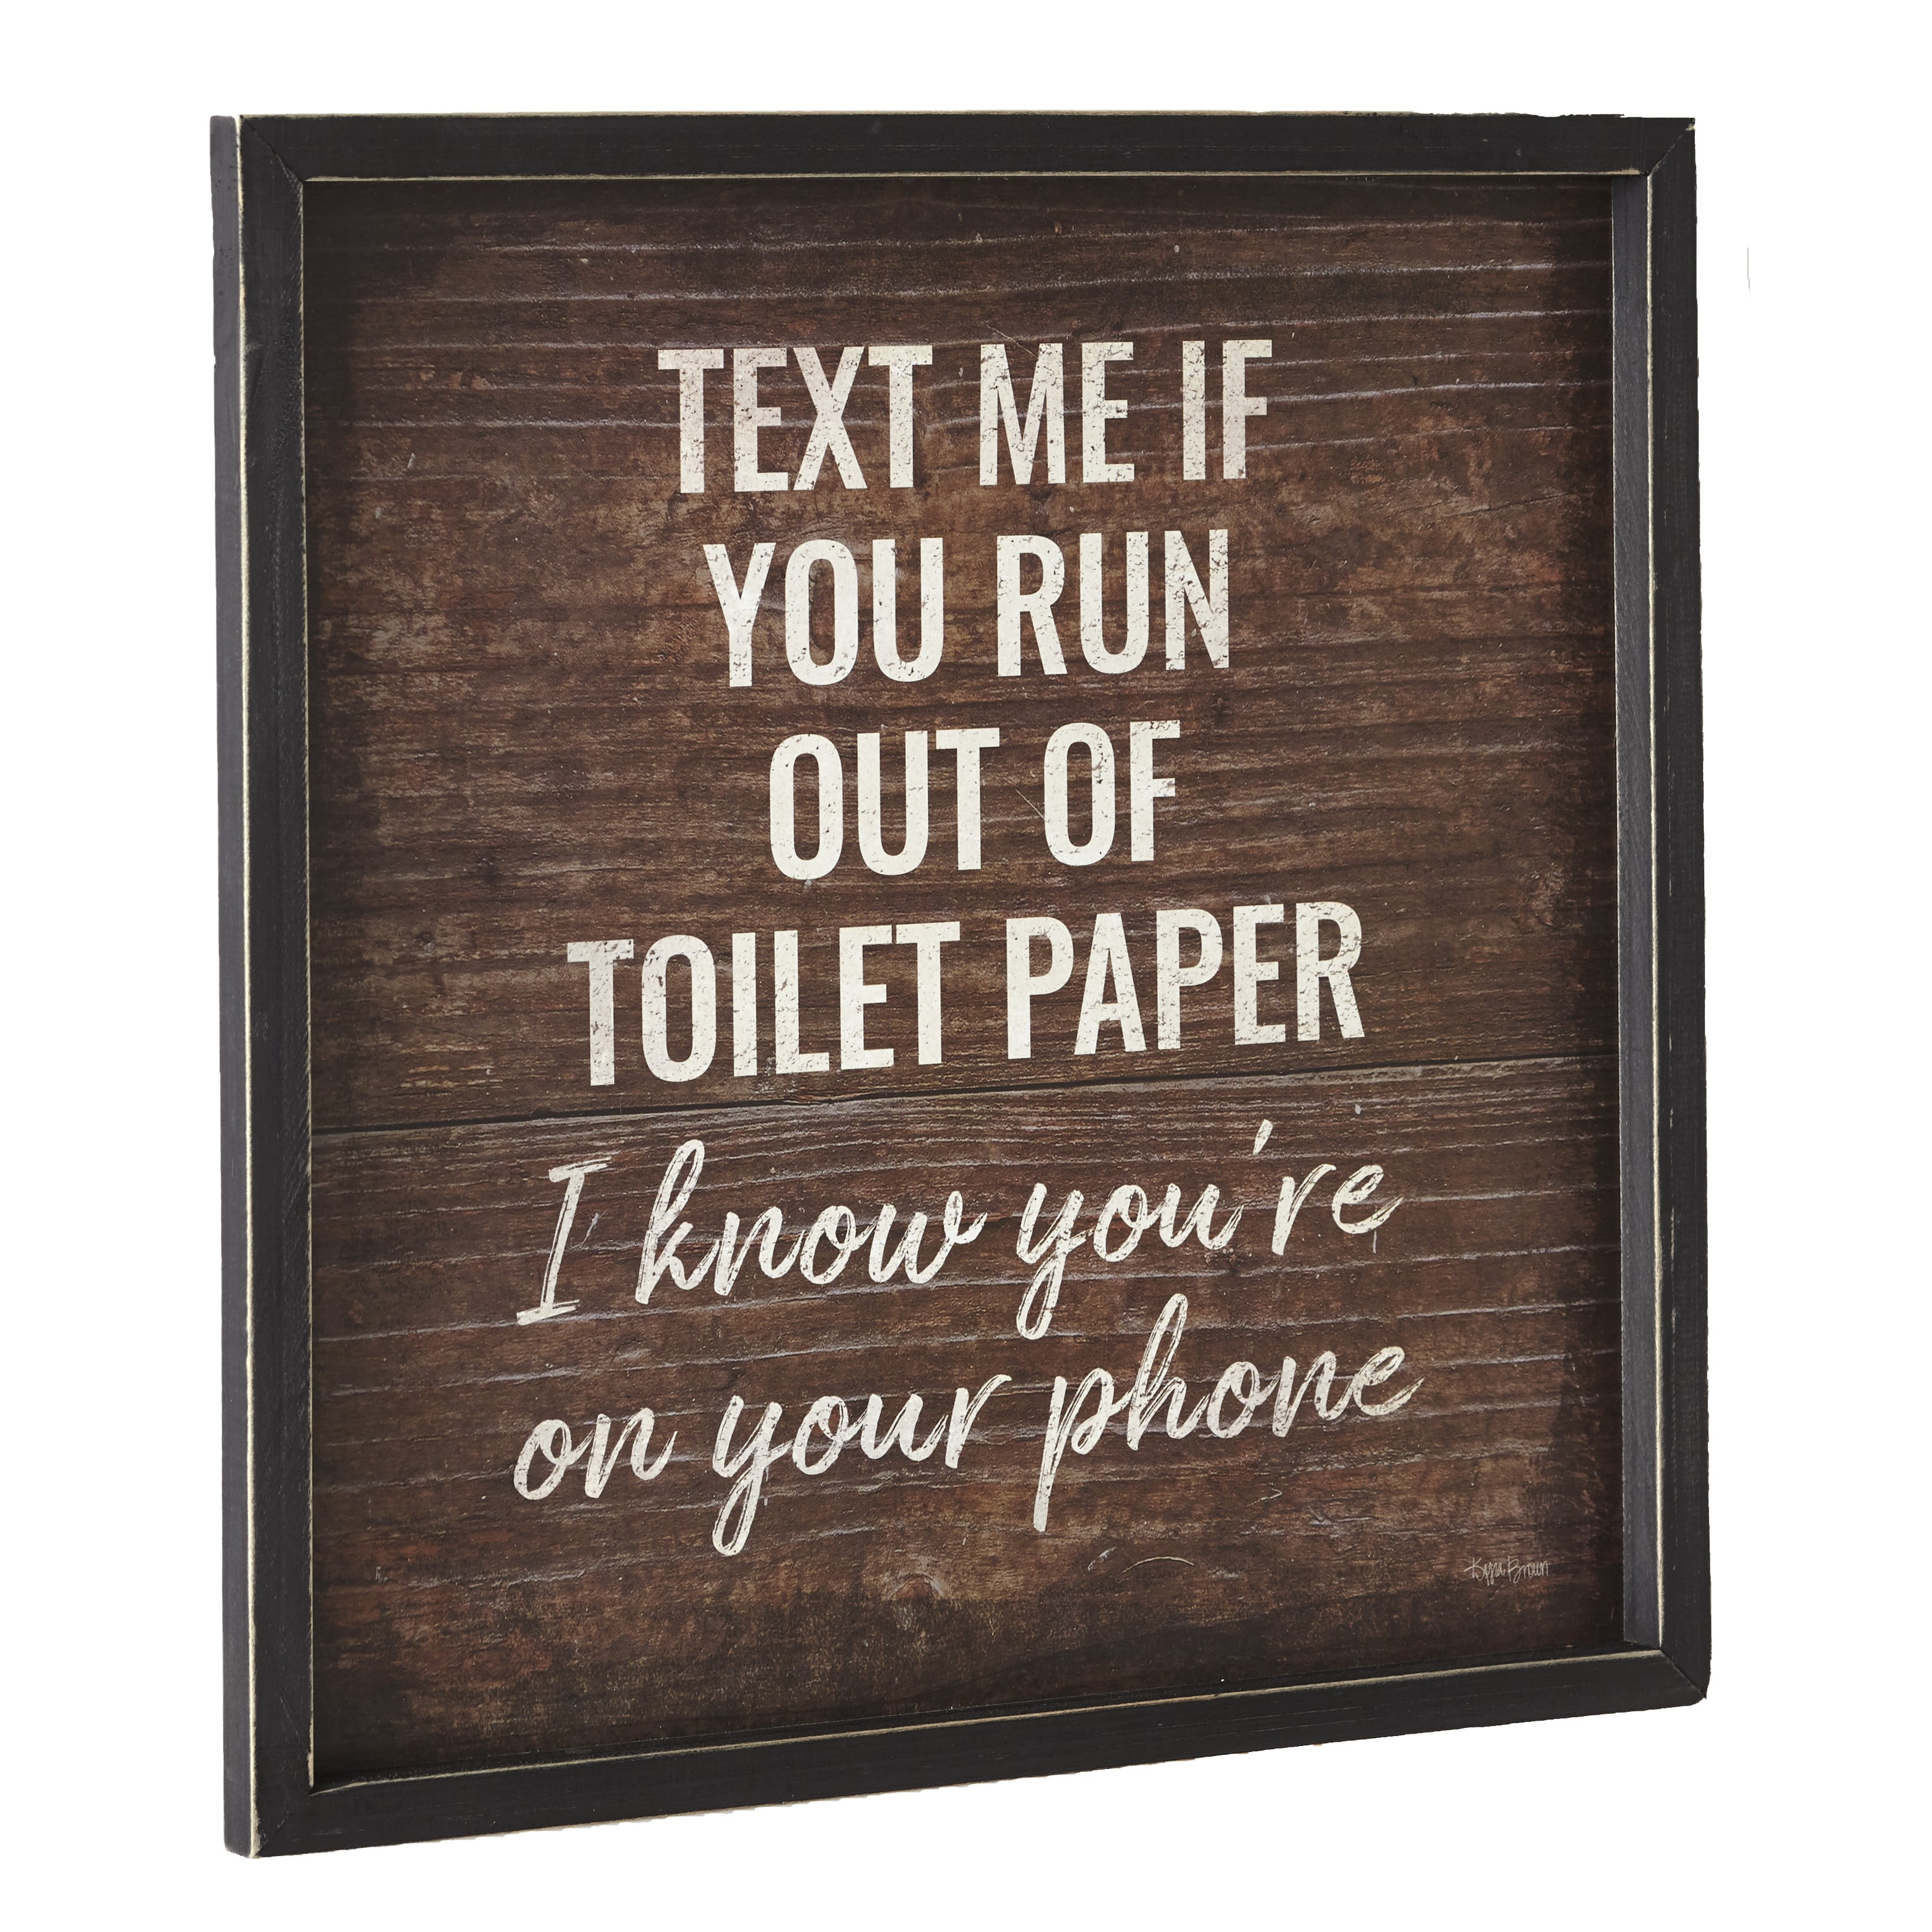 Rustic Wood Sign TOILET PAPER Bathroom Restroom Office Home Decor Funny Welcome 